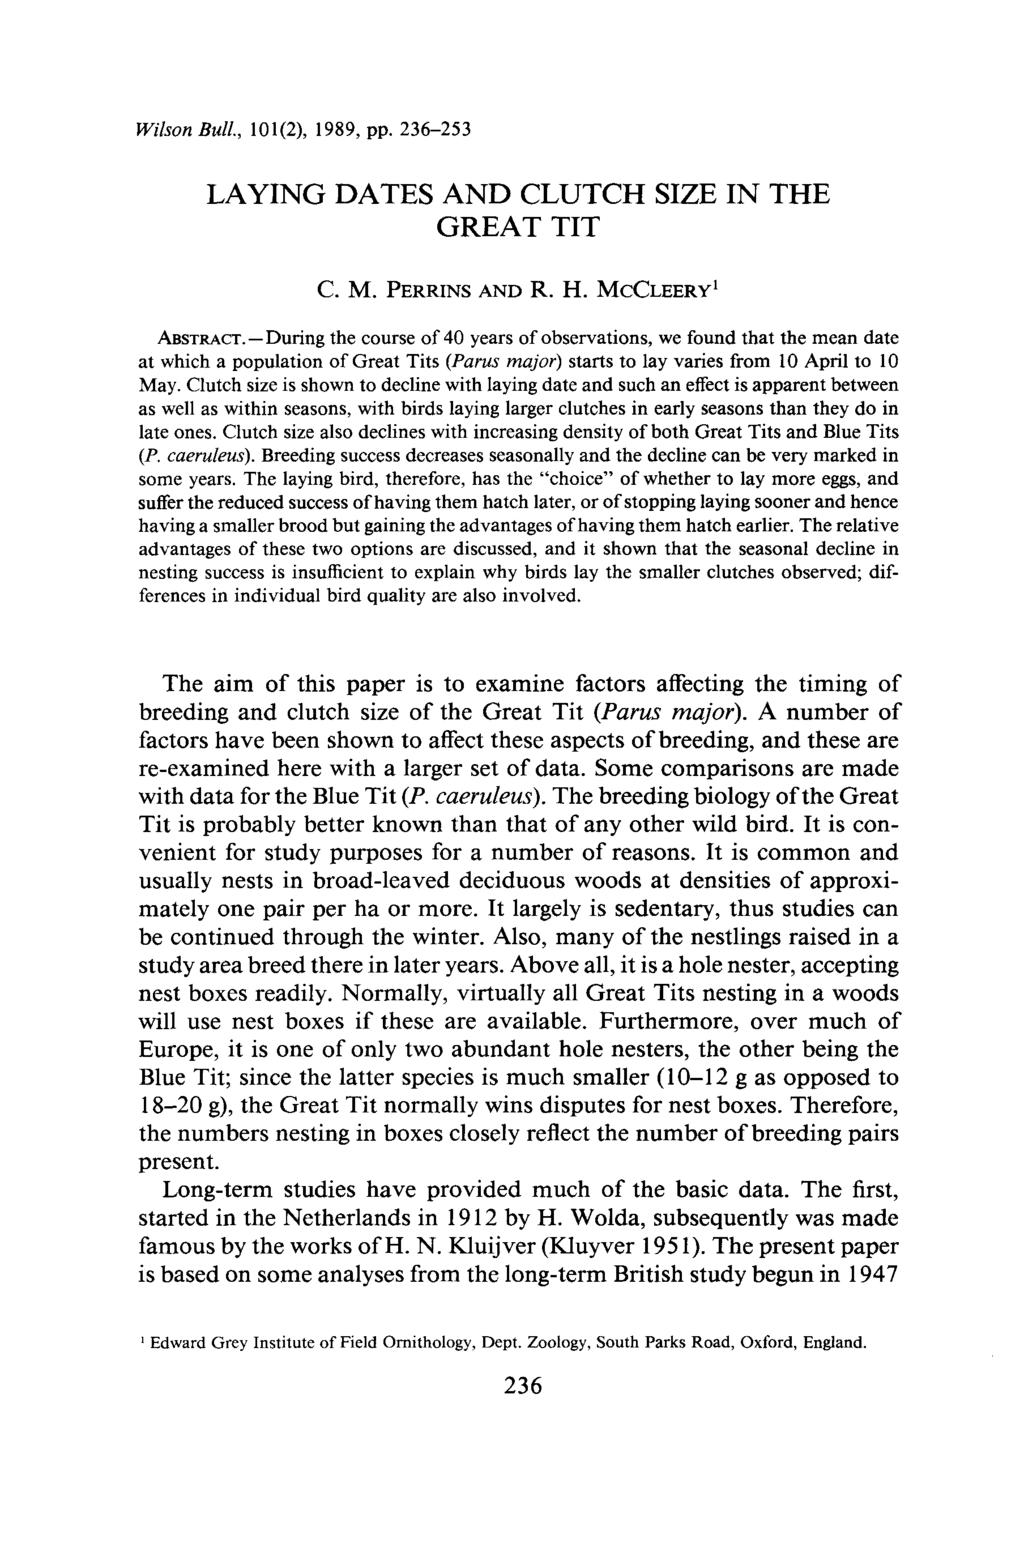 Wilson Bull., 101(2), 1989, pp. 236-253 LAYING DATES AND CLUTCH SIZE IN THE GREAT TIT C. M. PERRINS AND R. H. MCCLEERY ABSTRACT.